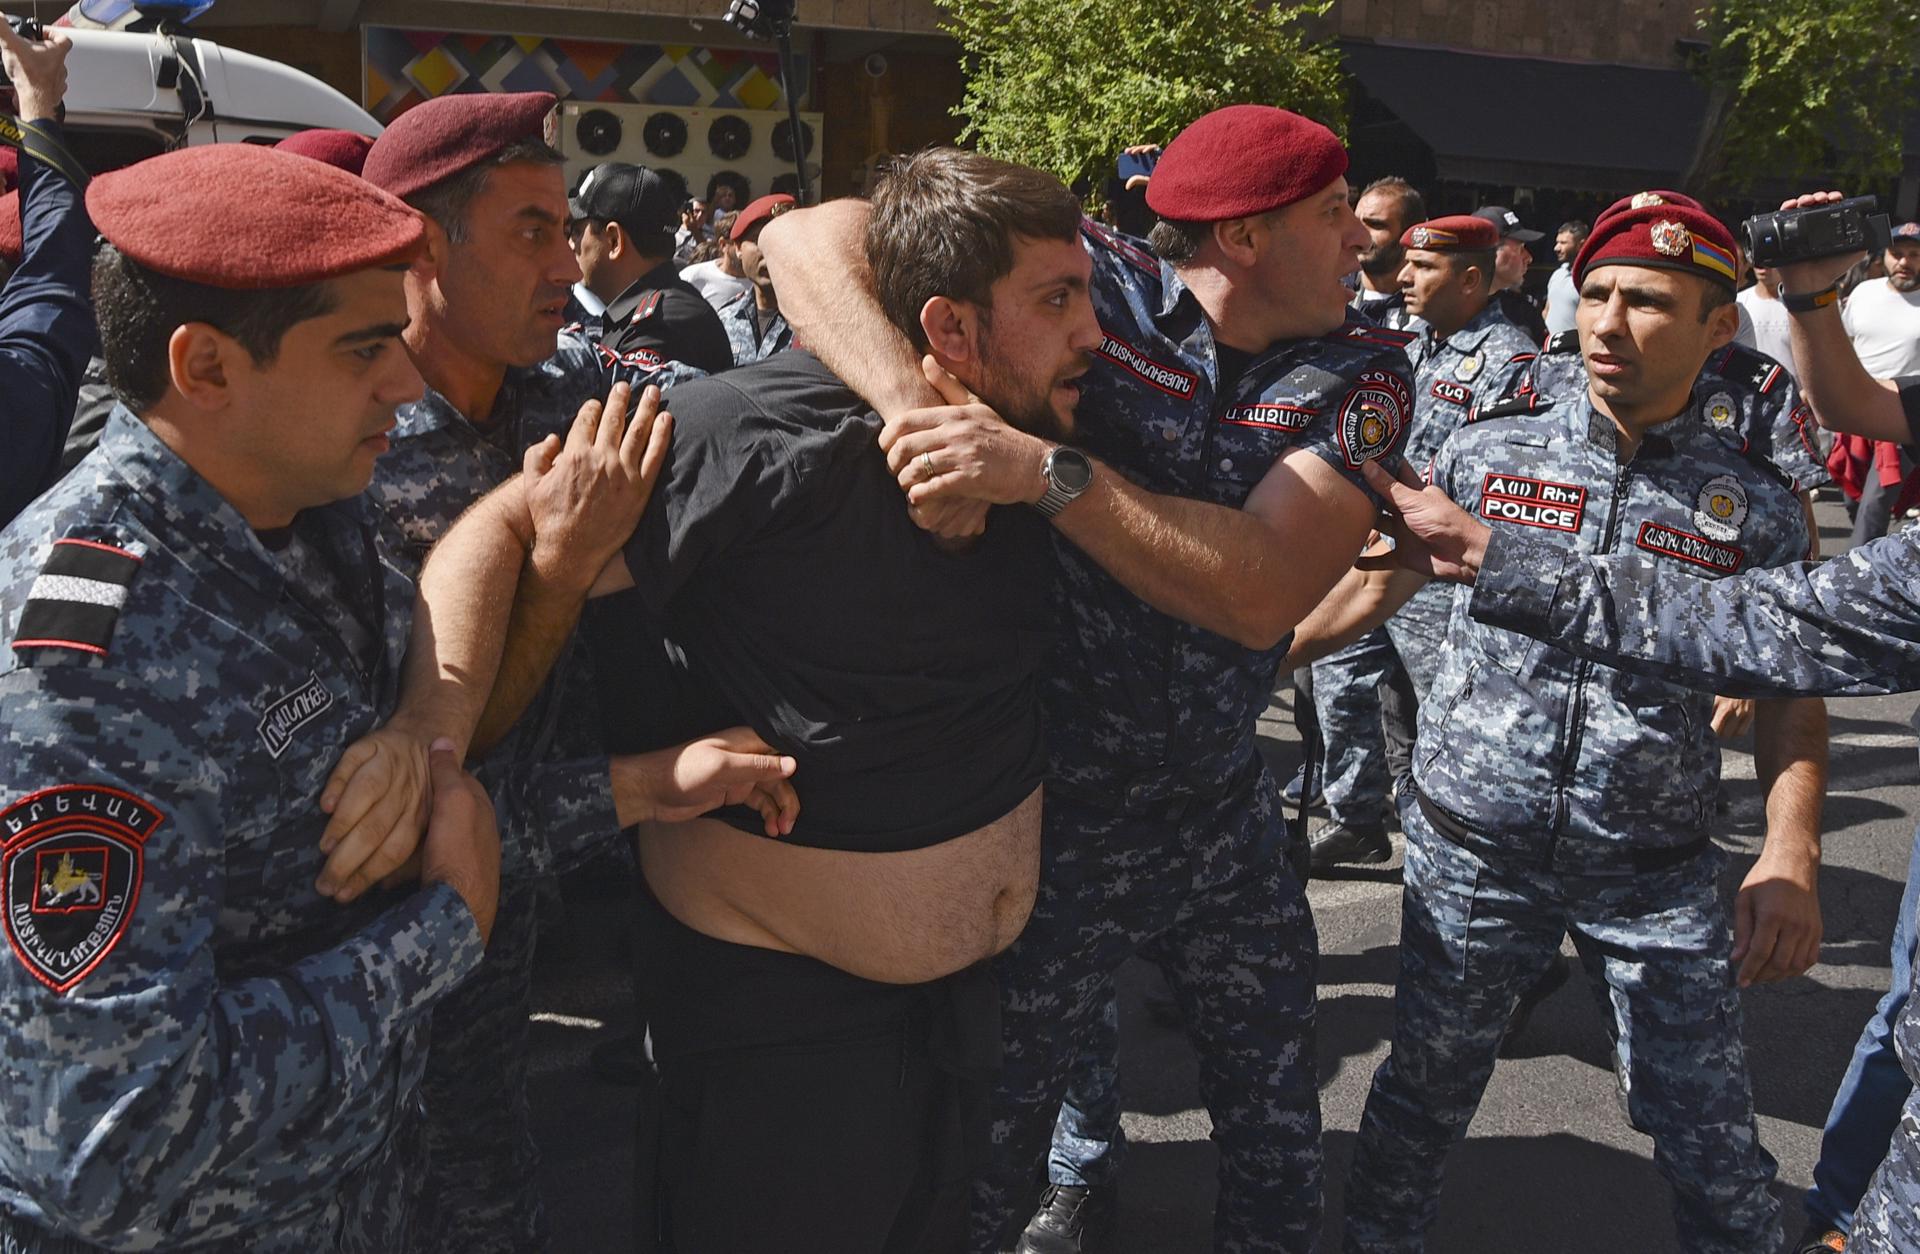 Yerevan (Armenia), 22/09/2023.- Armenian policemen detain a man during a protest against Azerbaijan's military action in the Nagorno-Karabakh region, in Yerevan, Armenia, 22 September 2023. More than 80 people were detained at anti-government rallies in Yerevan, the Armenian Police reported. On 19 September, after the start of the military operation of the Azerbaijani Armed Forces in Nagorno-Karabakh, opposition protests began in Armenia demanding the resignation of Prime Minister Nikol Pashinyan. A national committee has been created that coordinates actions to remove Pashinyan and his government from power. Representative of the Dashnaktsutyun party Ishkhan Saghatelyan said that the parliamentary opposition is also initiating the process of impeachment of Pashinyan. (Protestas, Azerbaiyán) EFE/EPA/NAREK ALEKSANYAN
